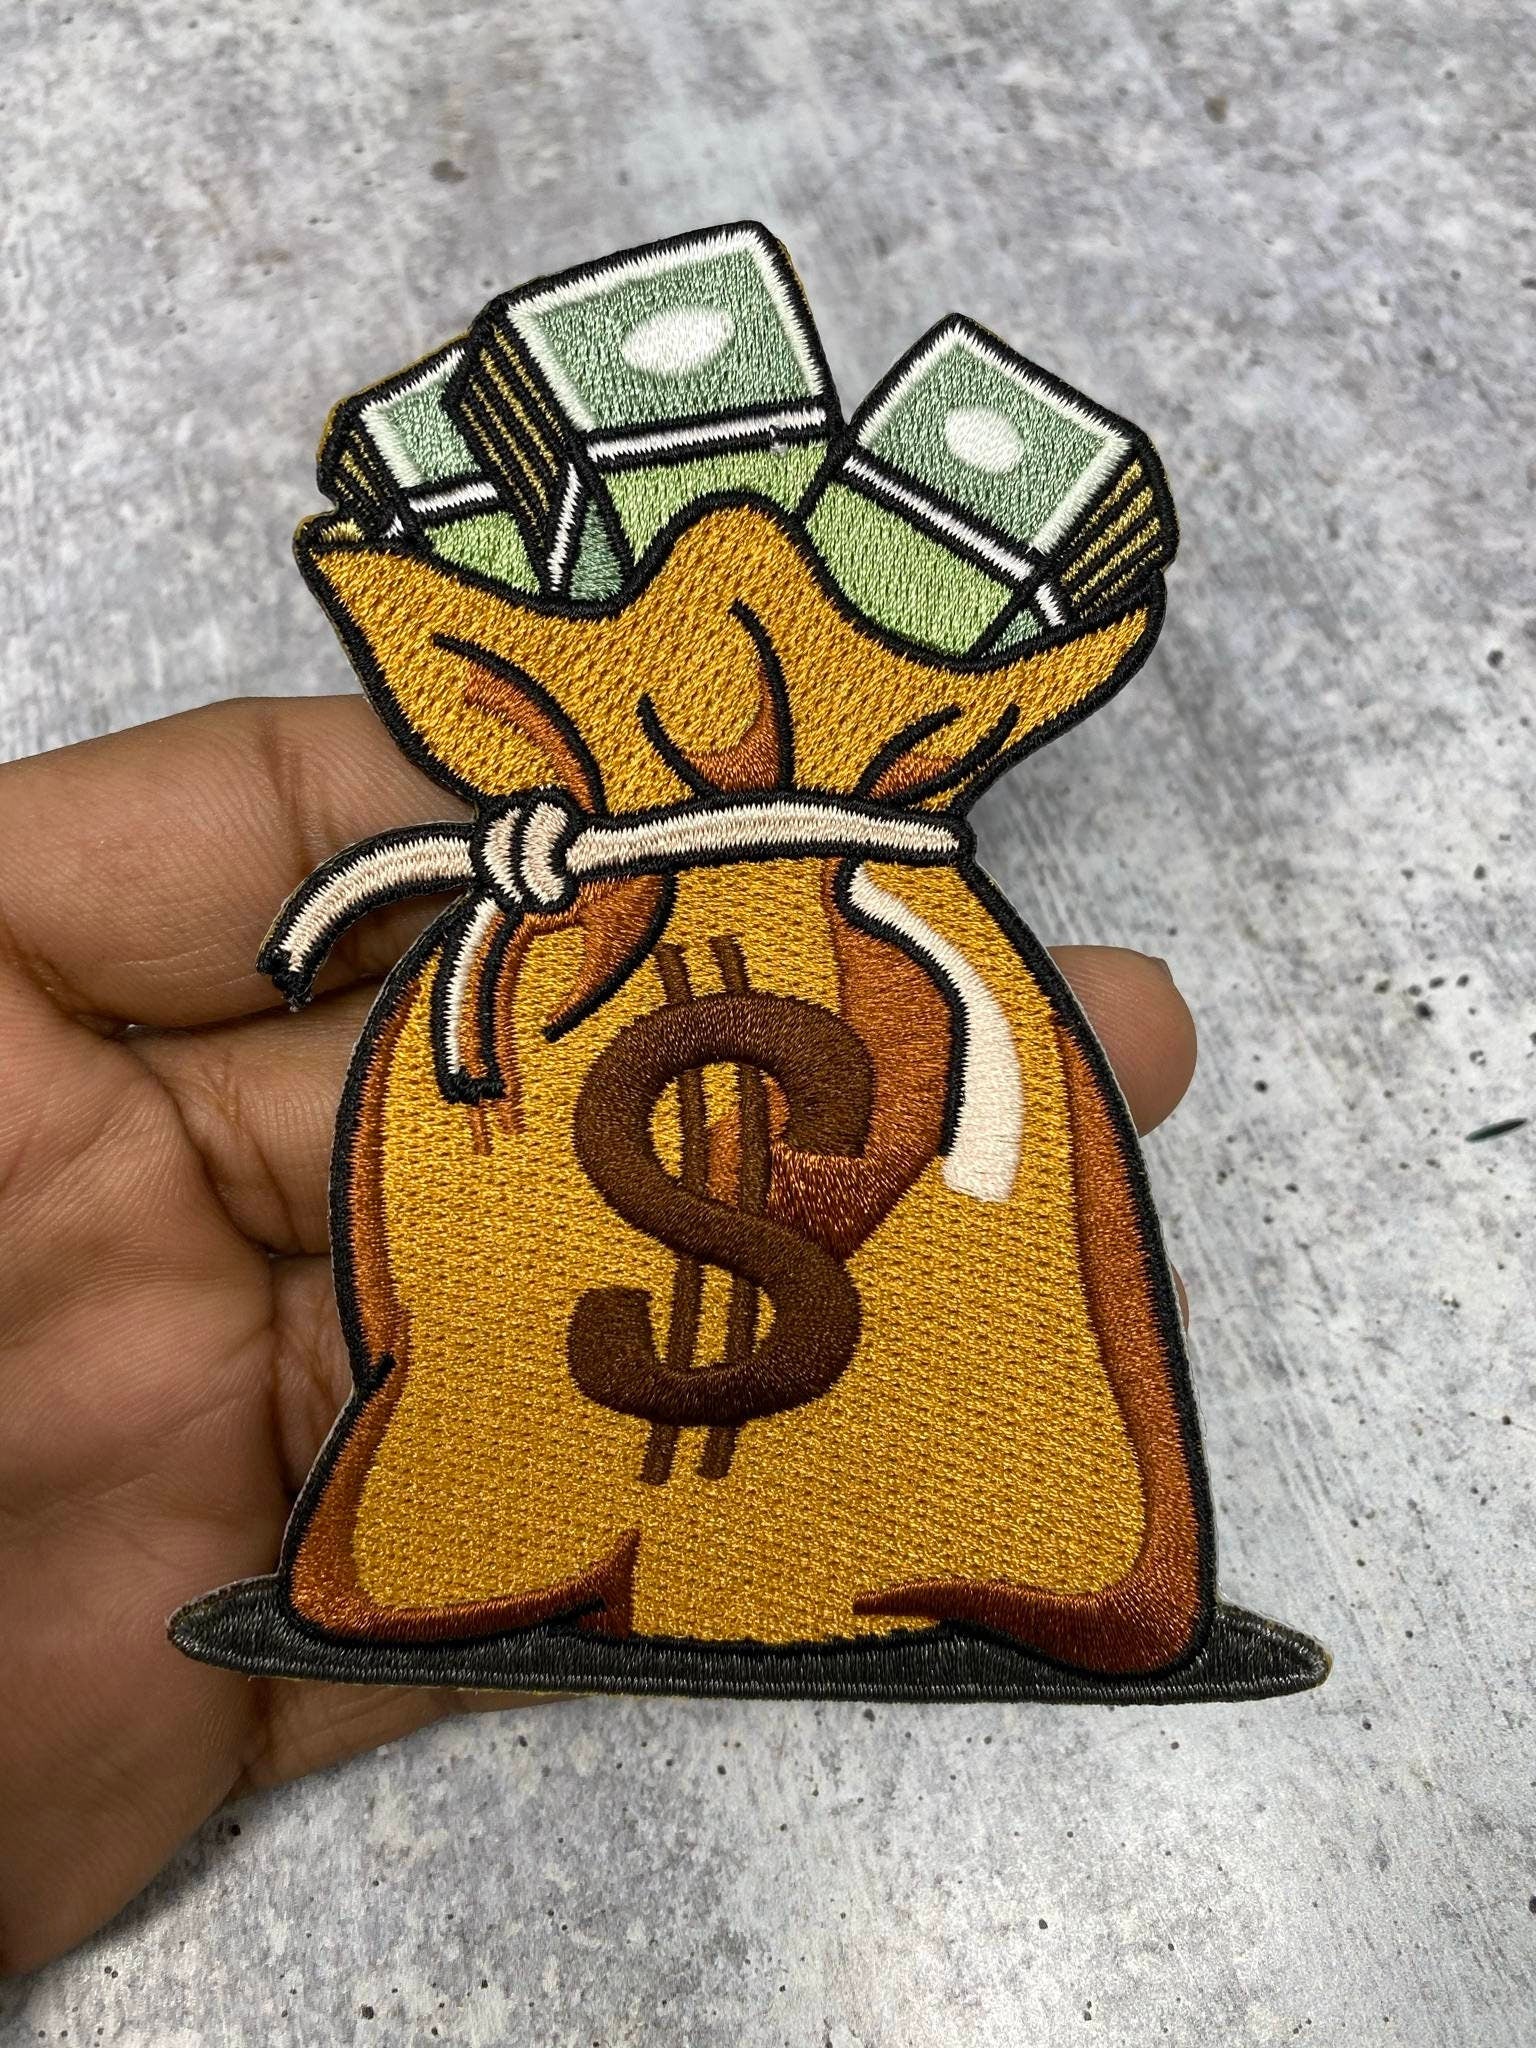 Medium: 1-pc, "Bag of Money", NEW, Check a Bag Patch, Size 5", Iron-on 100% Embroidered Patch; Entrepreneur Gift; Fun Jacket Patch, DIY